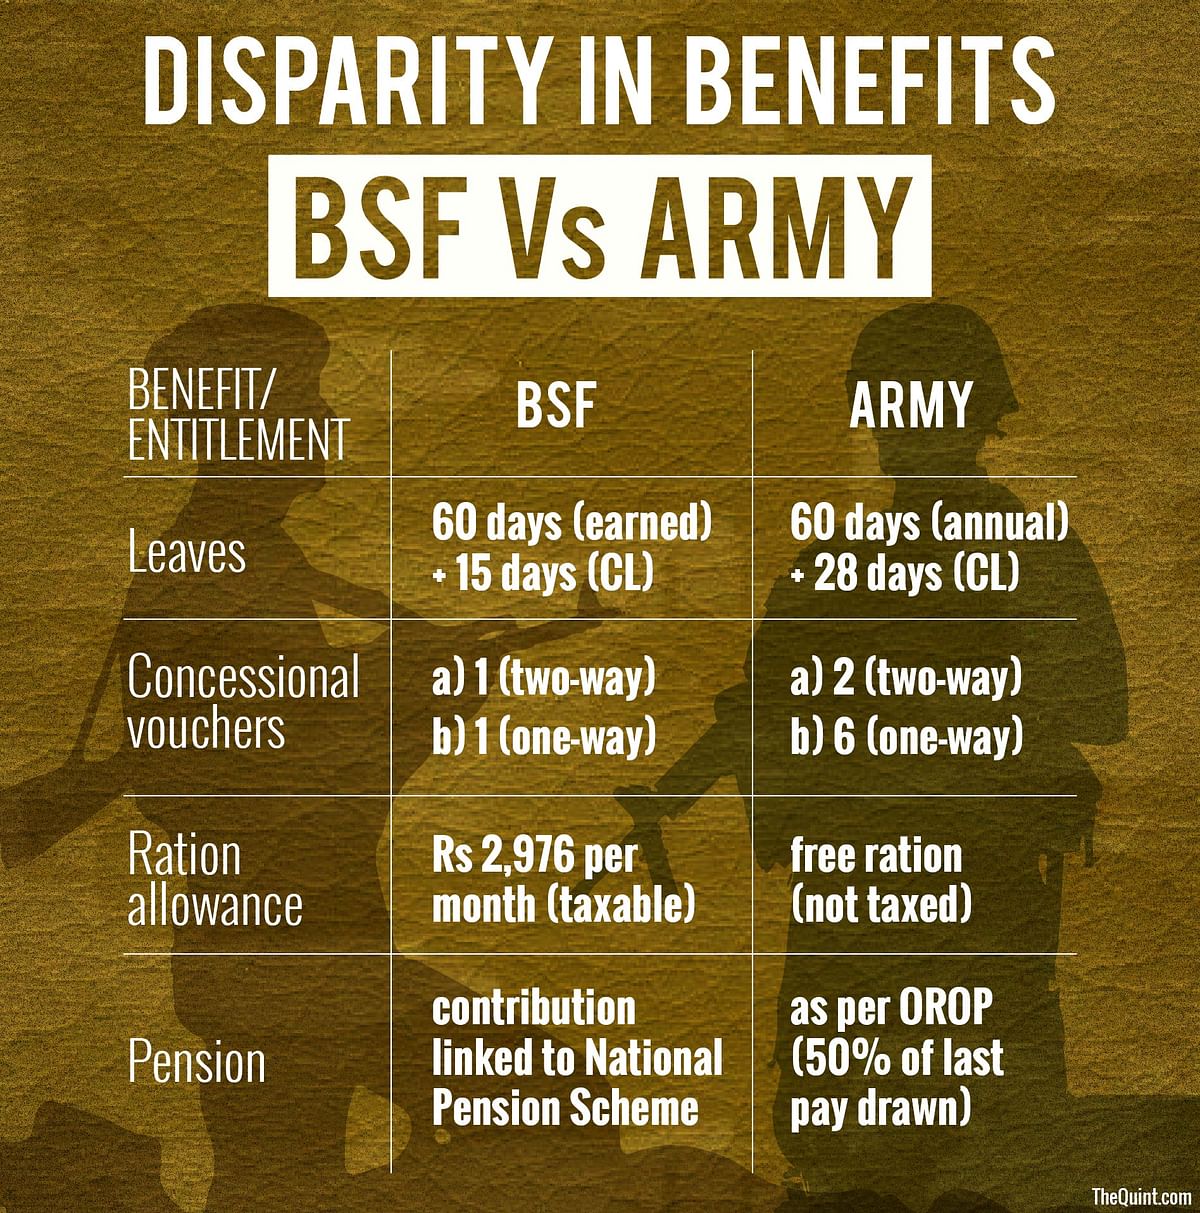 Why must BSF jawans be discriminated against on allowances when they do the same dangerous tasks as army soldiers?